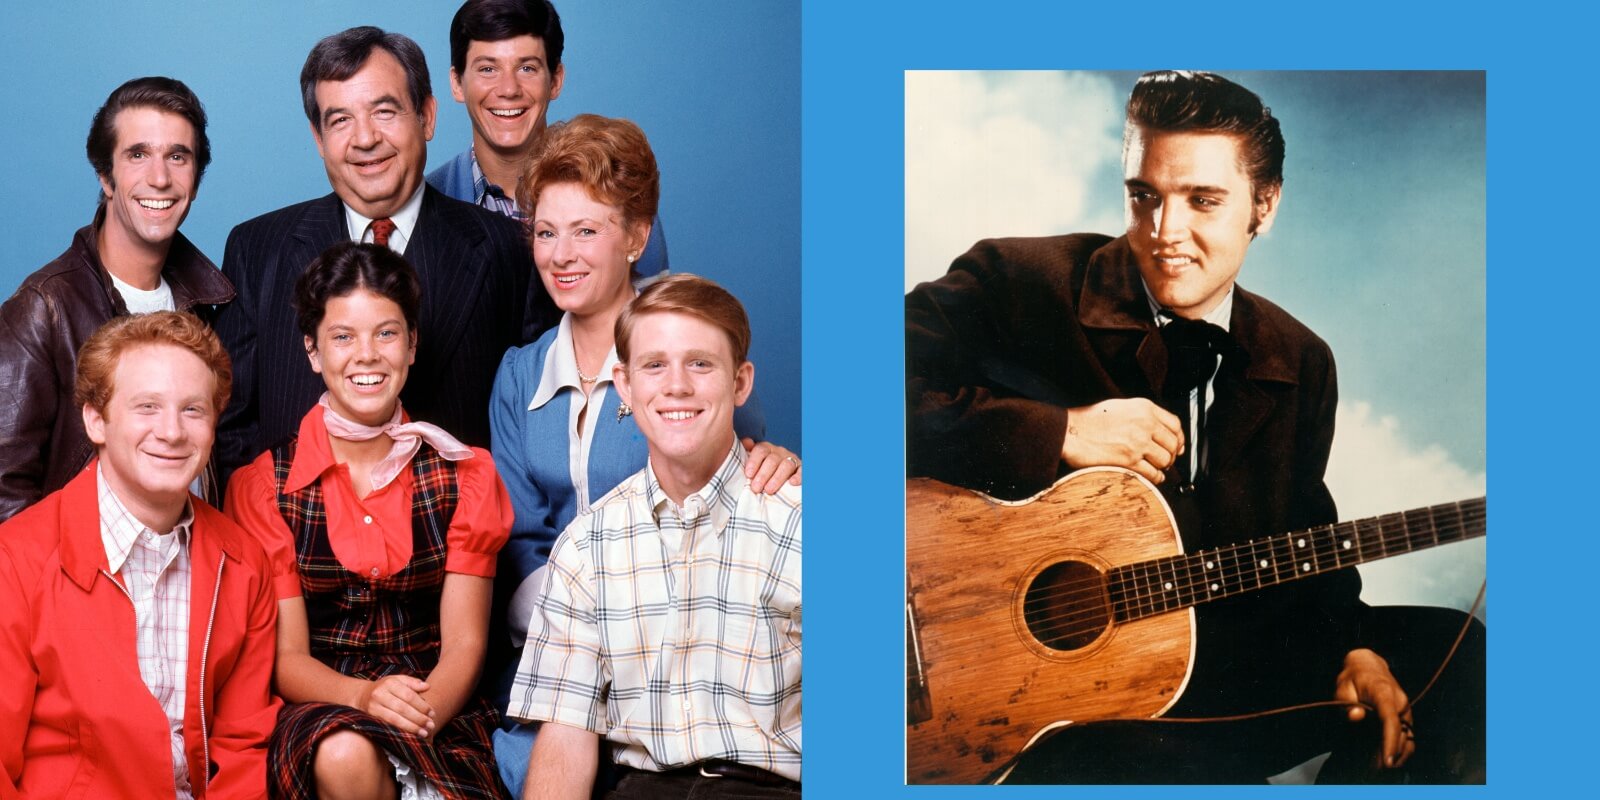 The 'Happy Days' cast in a side-by-side photo with entertainer Elvis Presley.